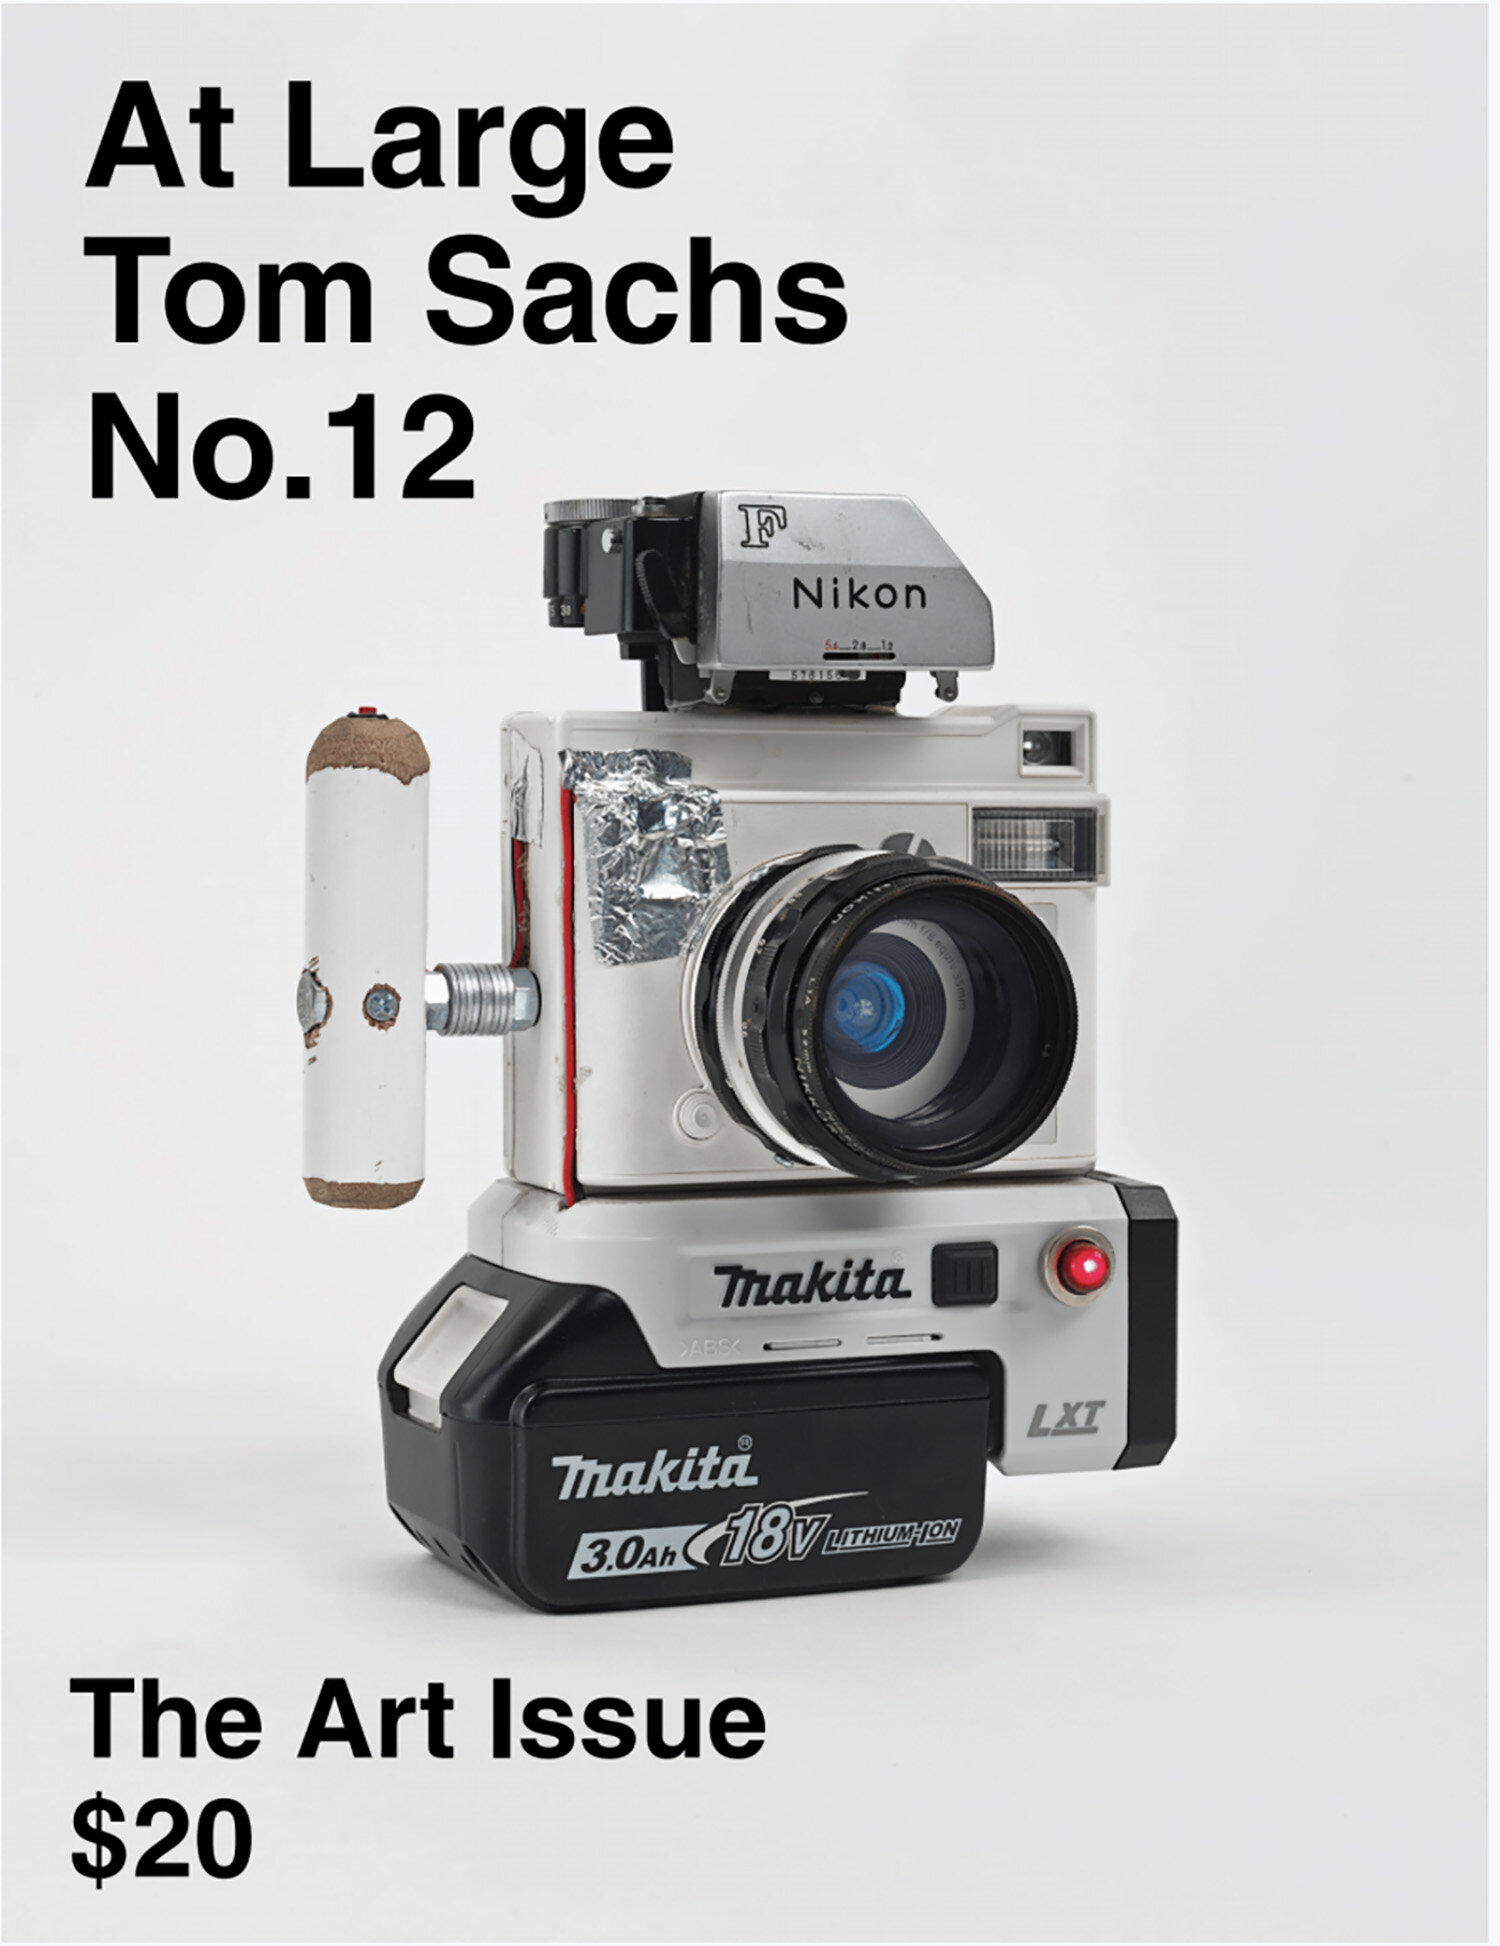 Tom Sachs for At Large